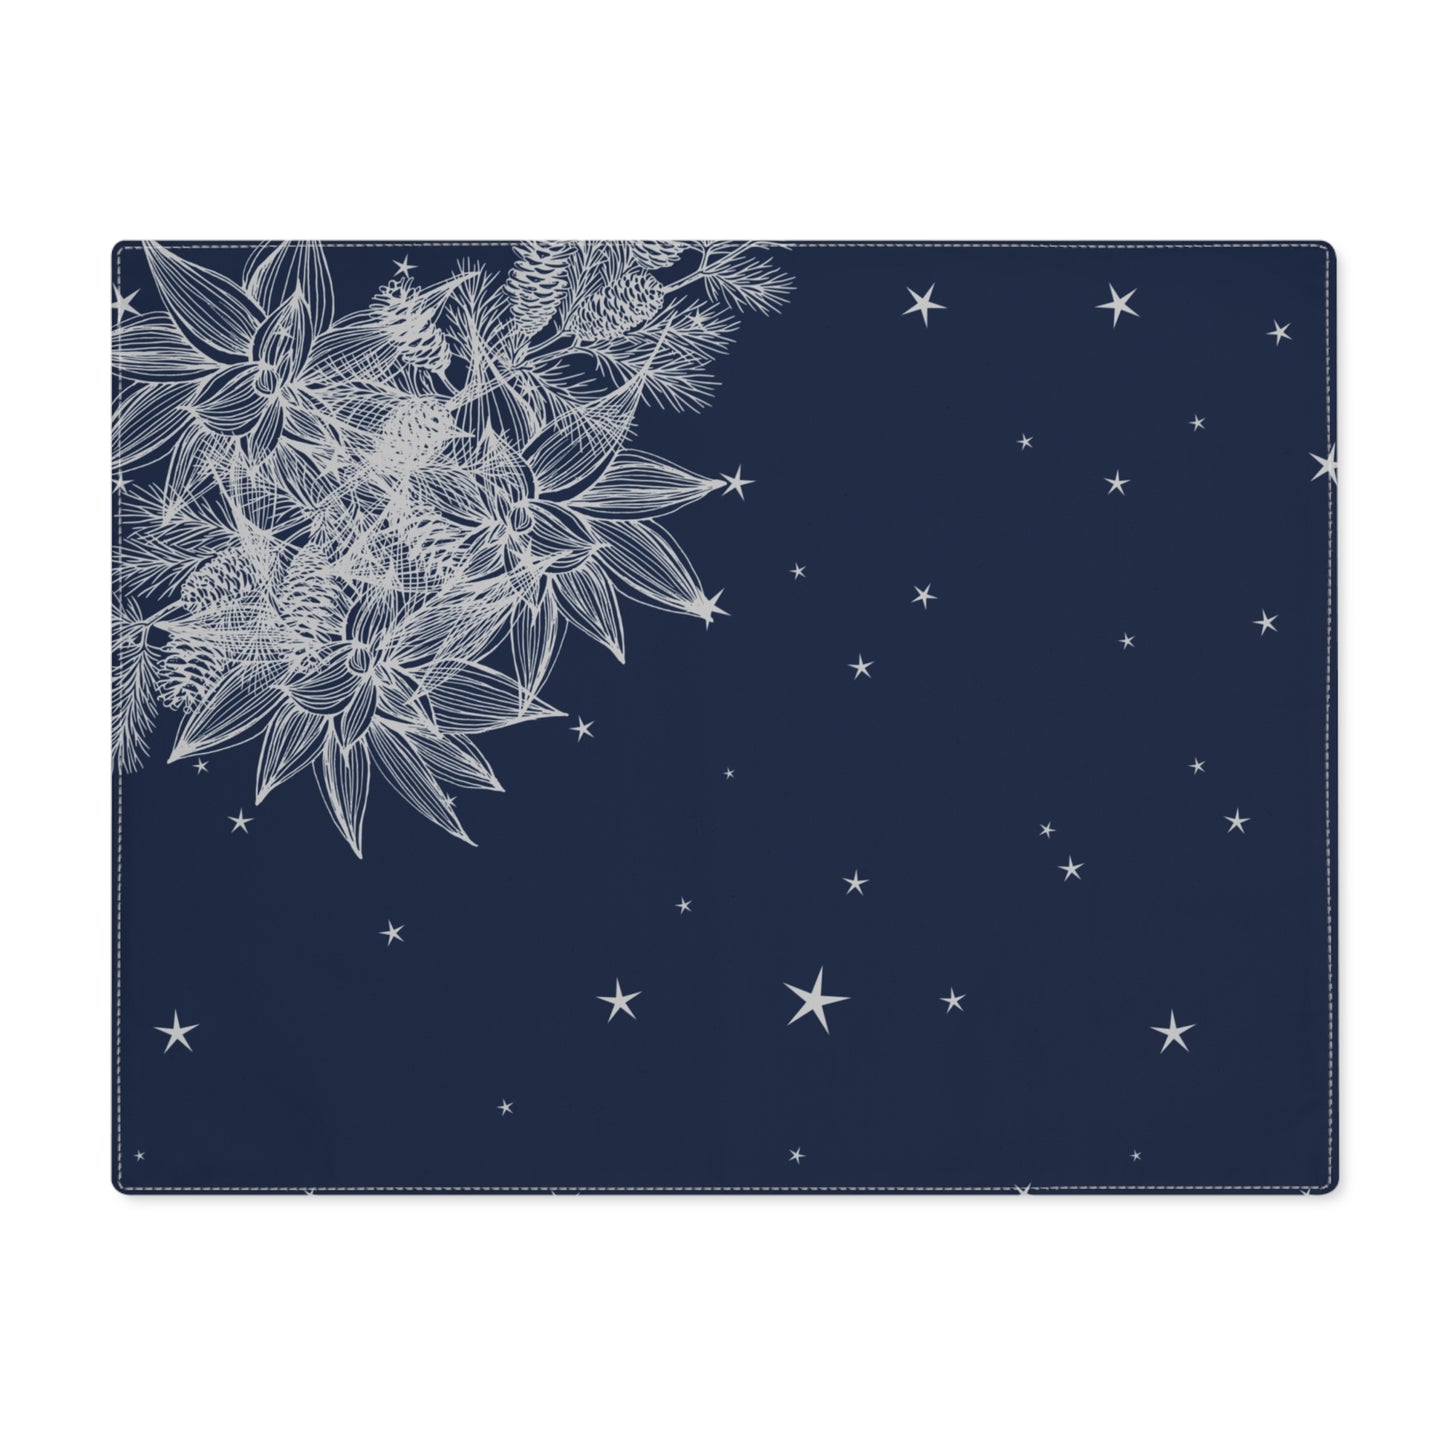 Dark Blue and Silver Poinsettia Garland with Pine Accents and Stars Christmas Placemat, 1pc